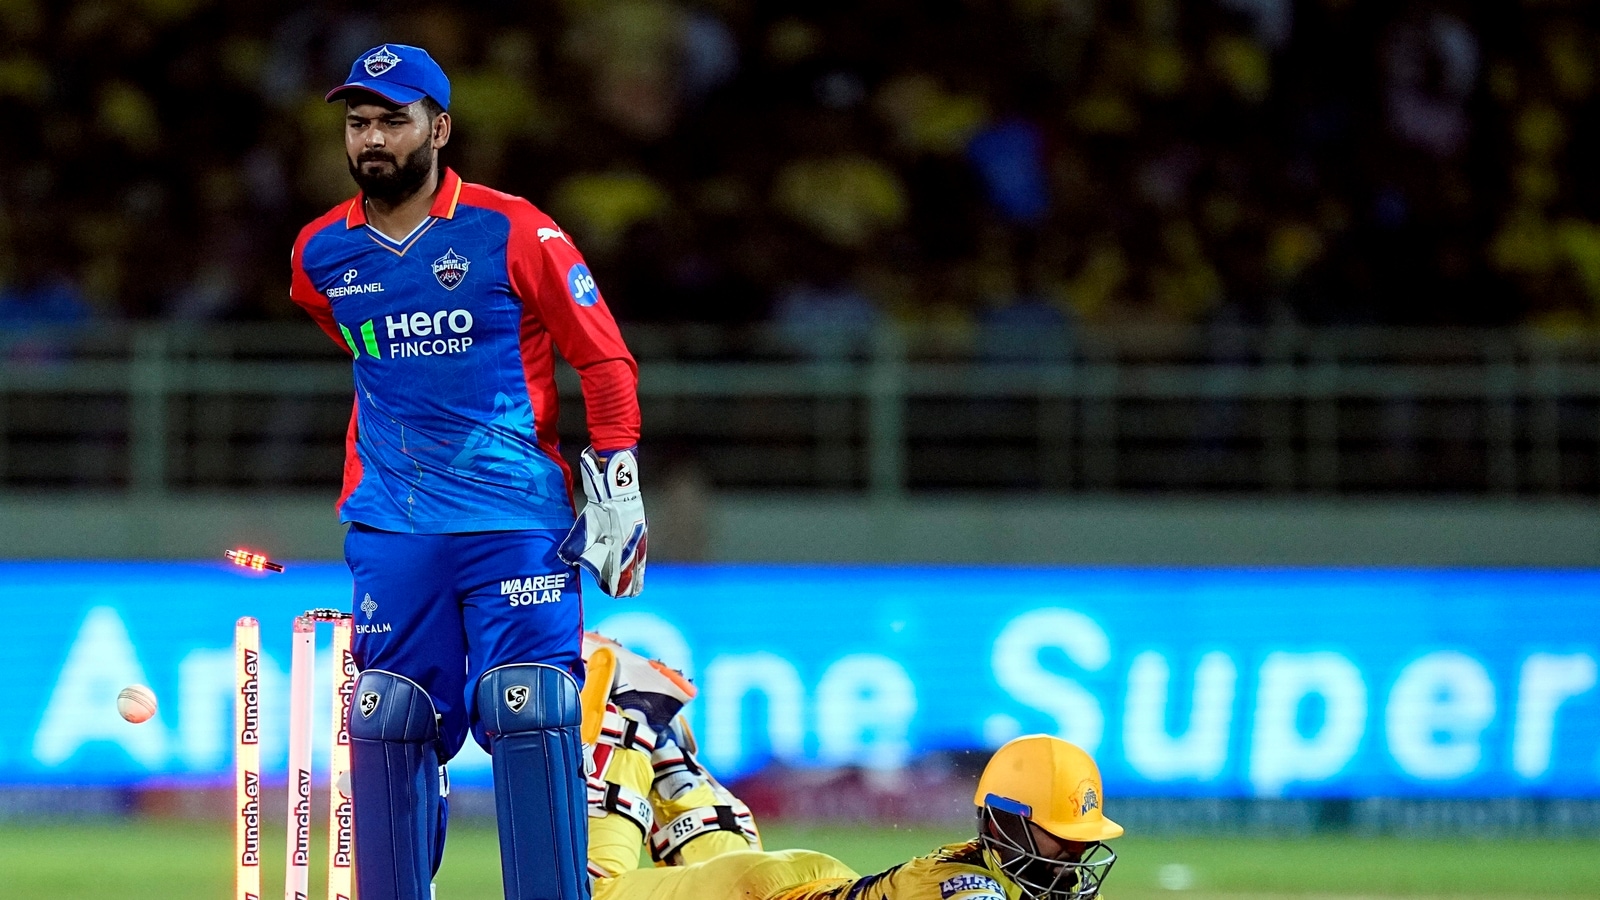 Rishabh Pant Fined INR 12 Lakh as Delhi Capitals Violate IPL Code of Conduct in Victory over CSK